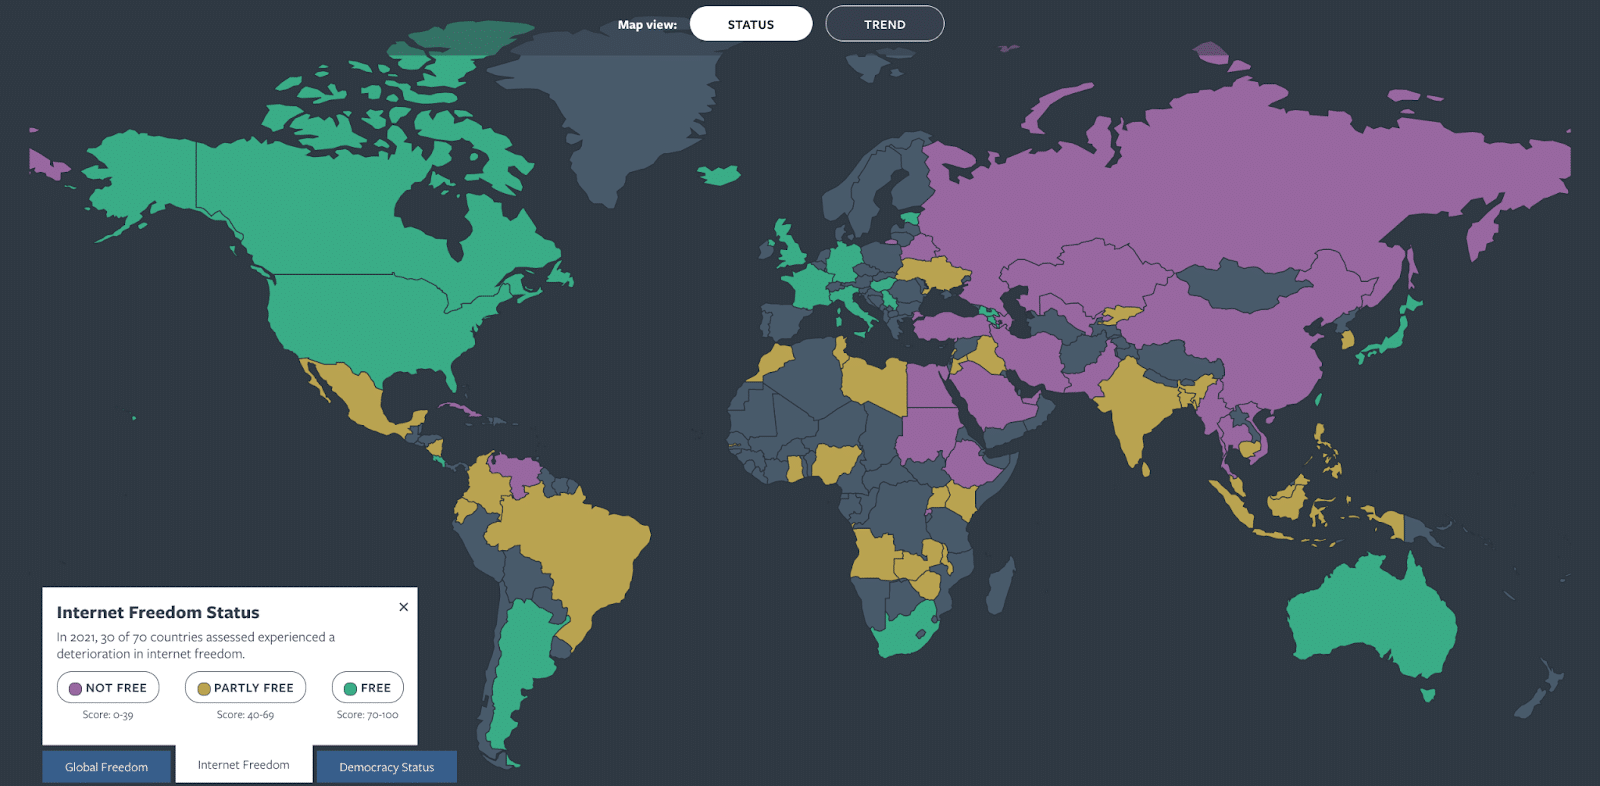 A map reflecting the current state of Internet freedom worldwide